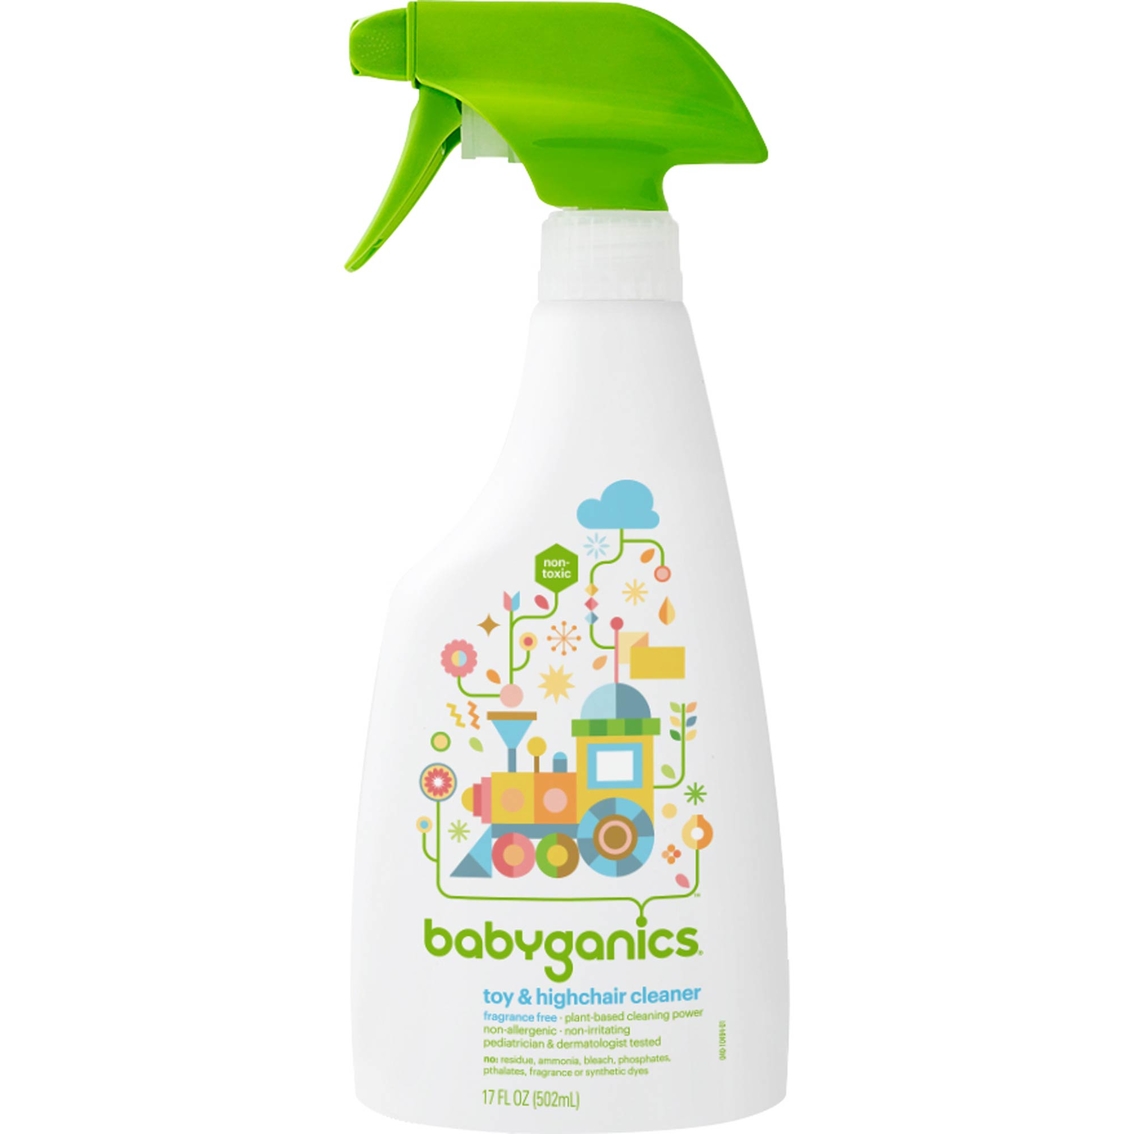 Babyganics Toy and Highchair Cleaner